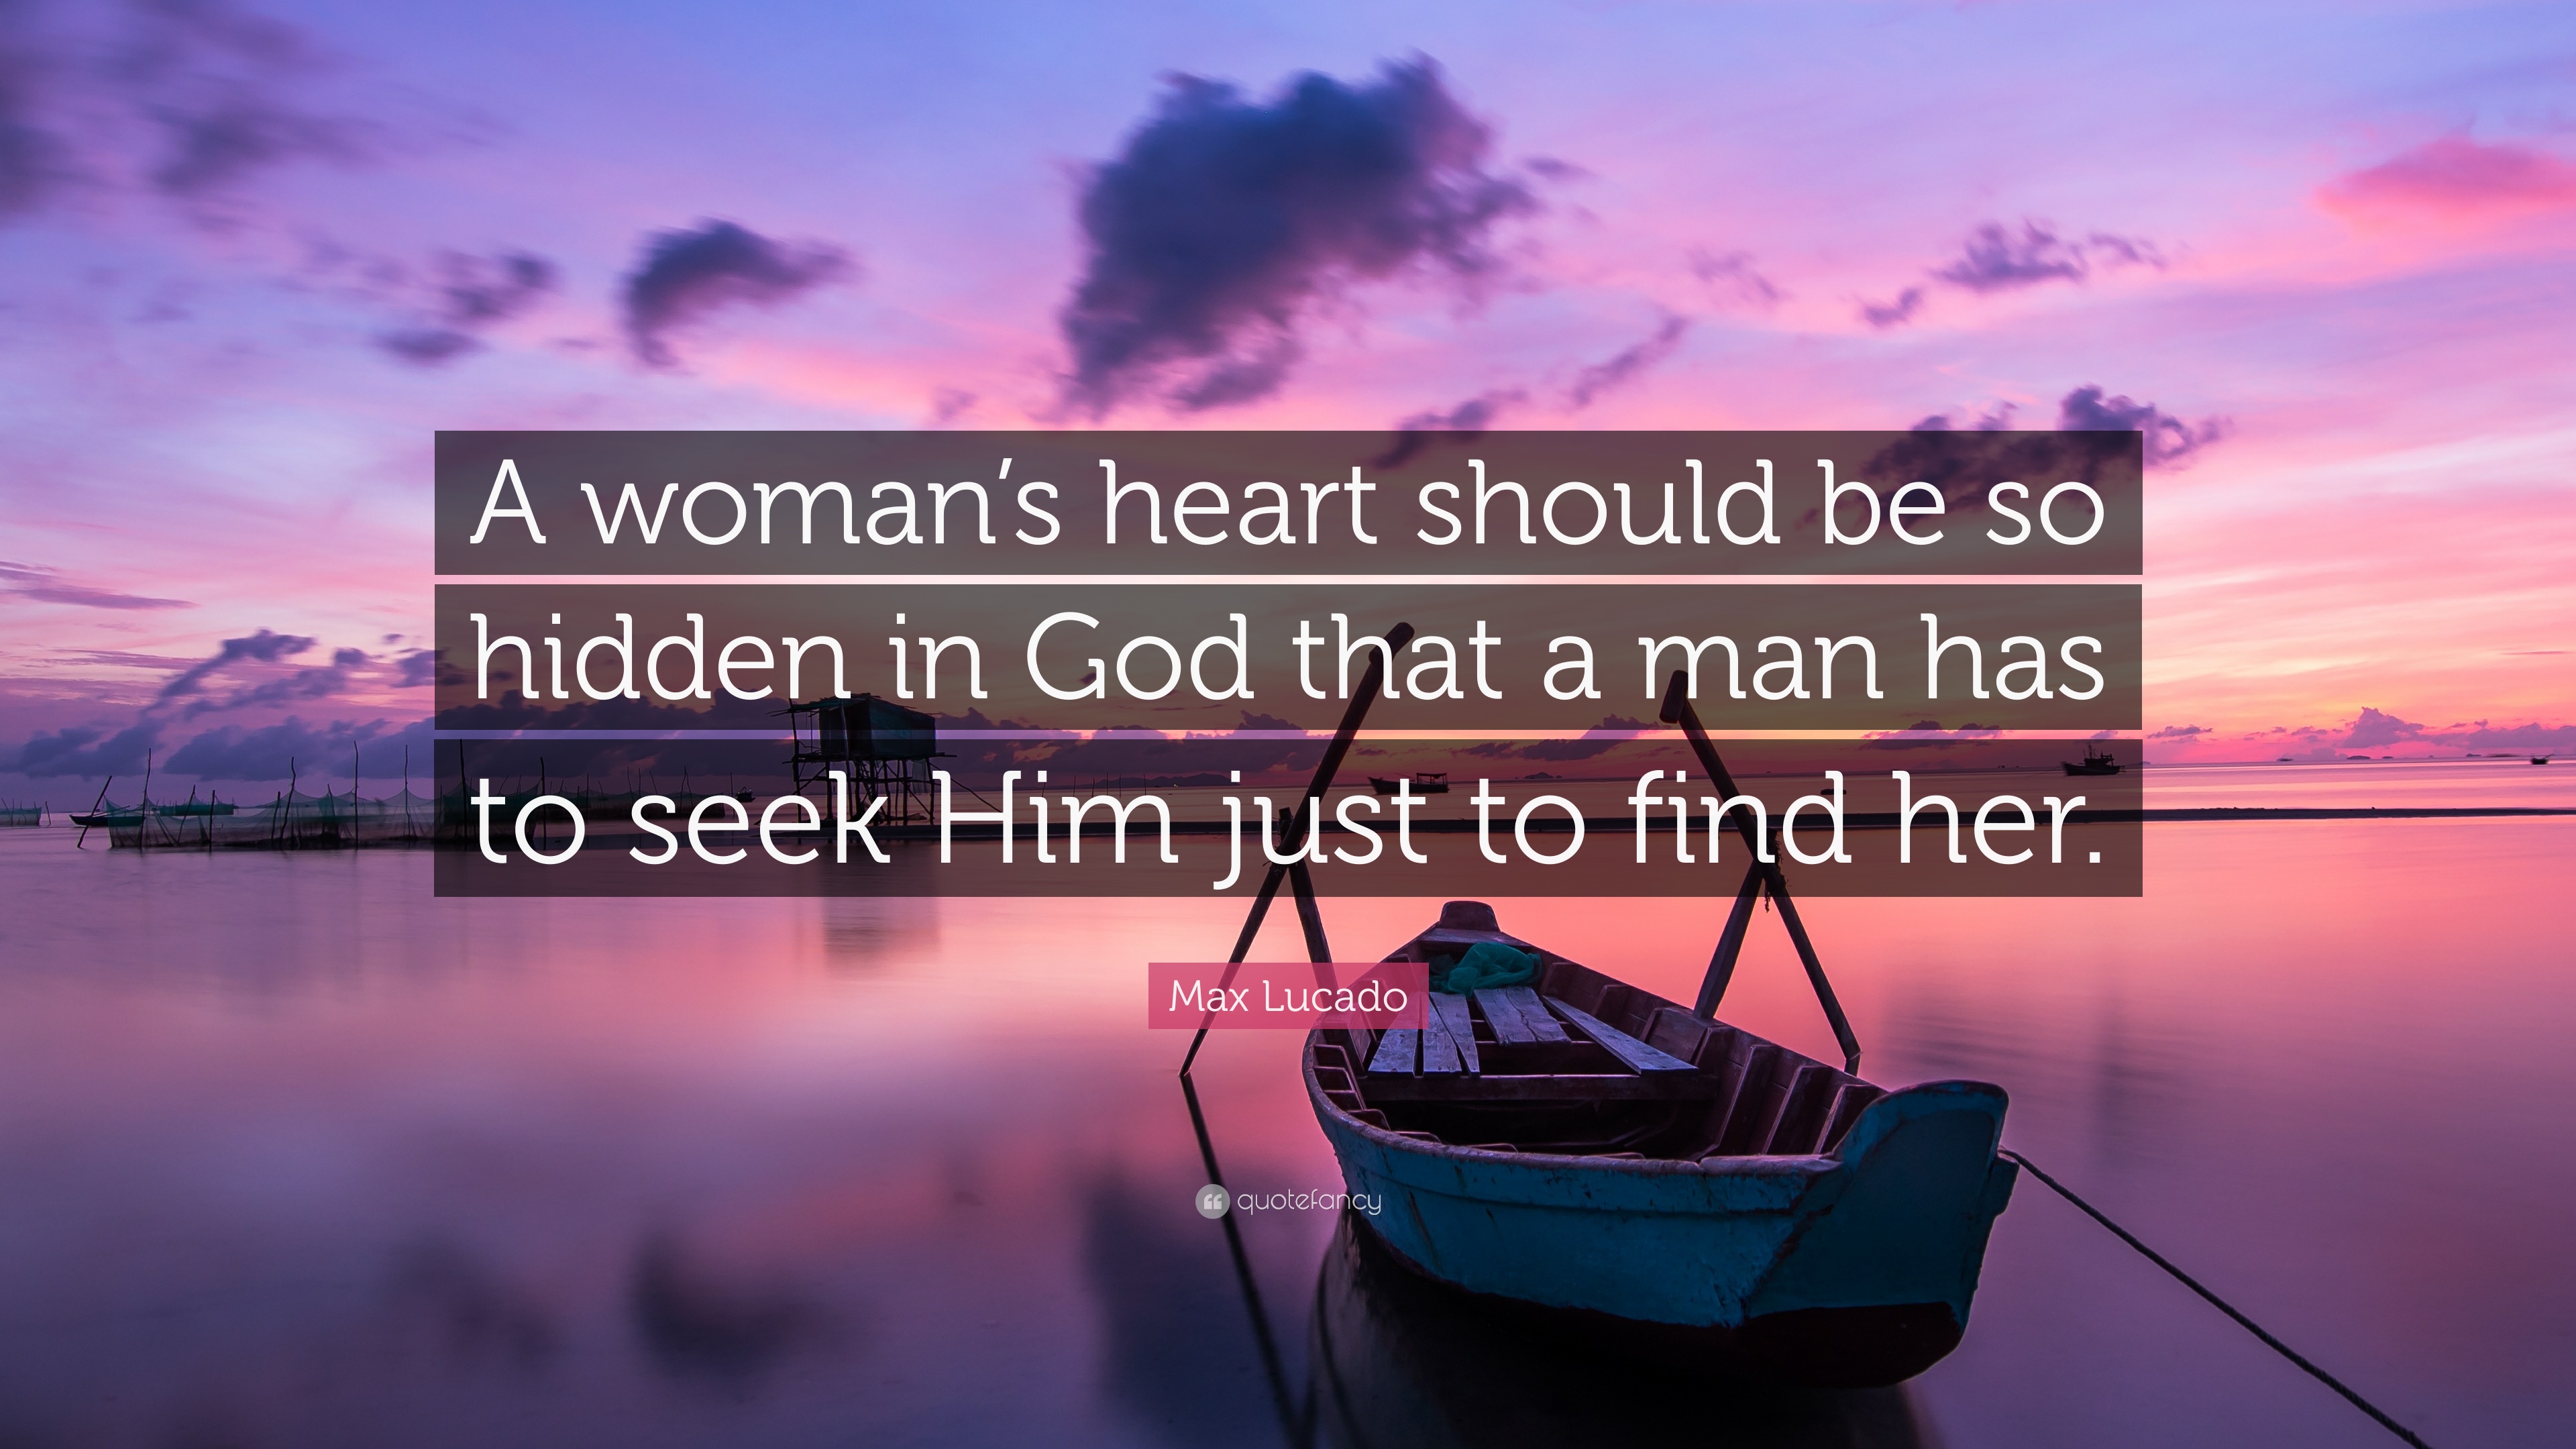 Max Lucado Quote: “A woman's heart should be so hidden in God that a